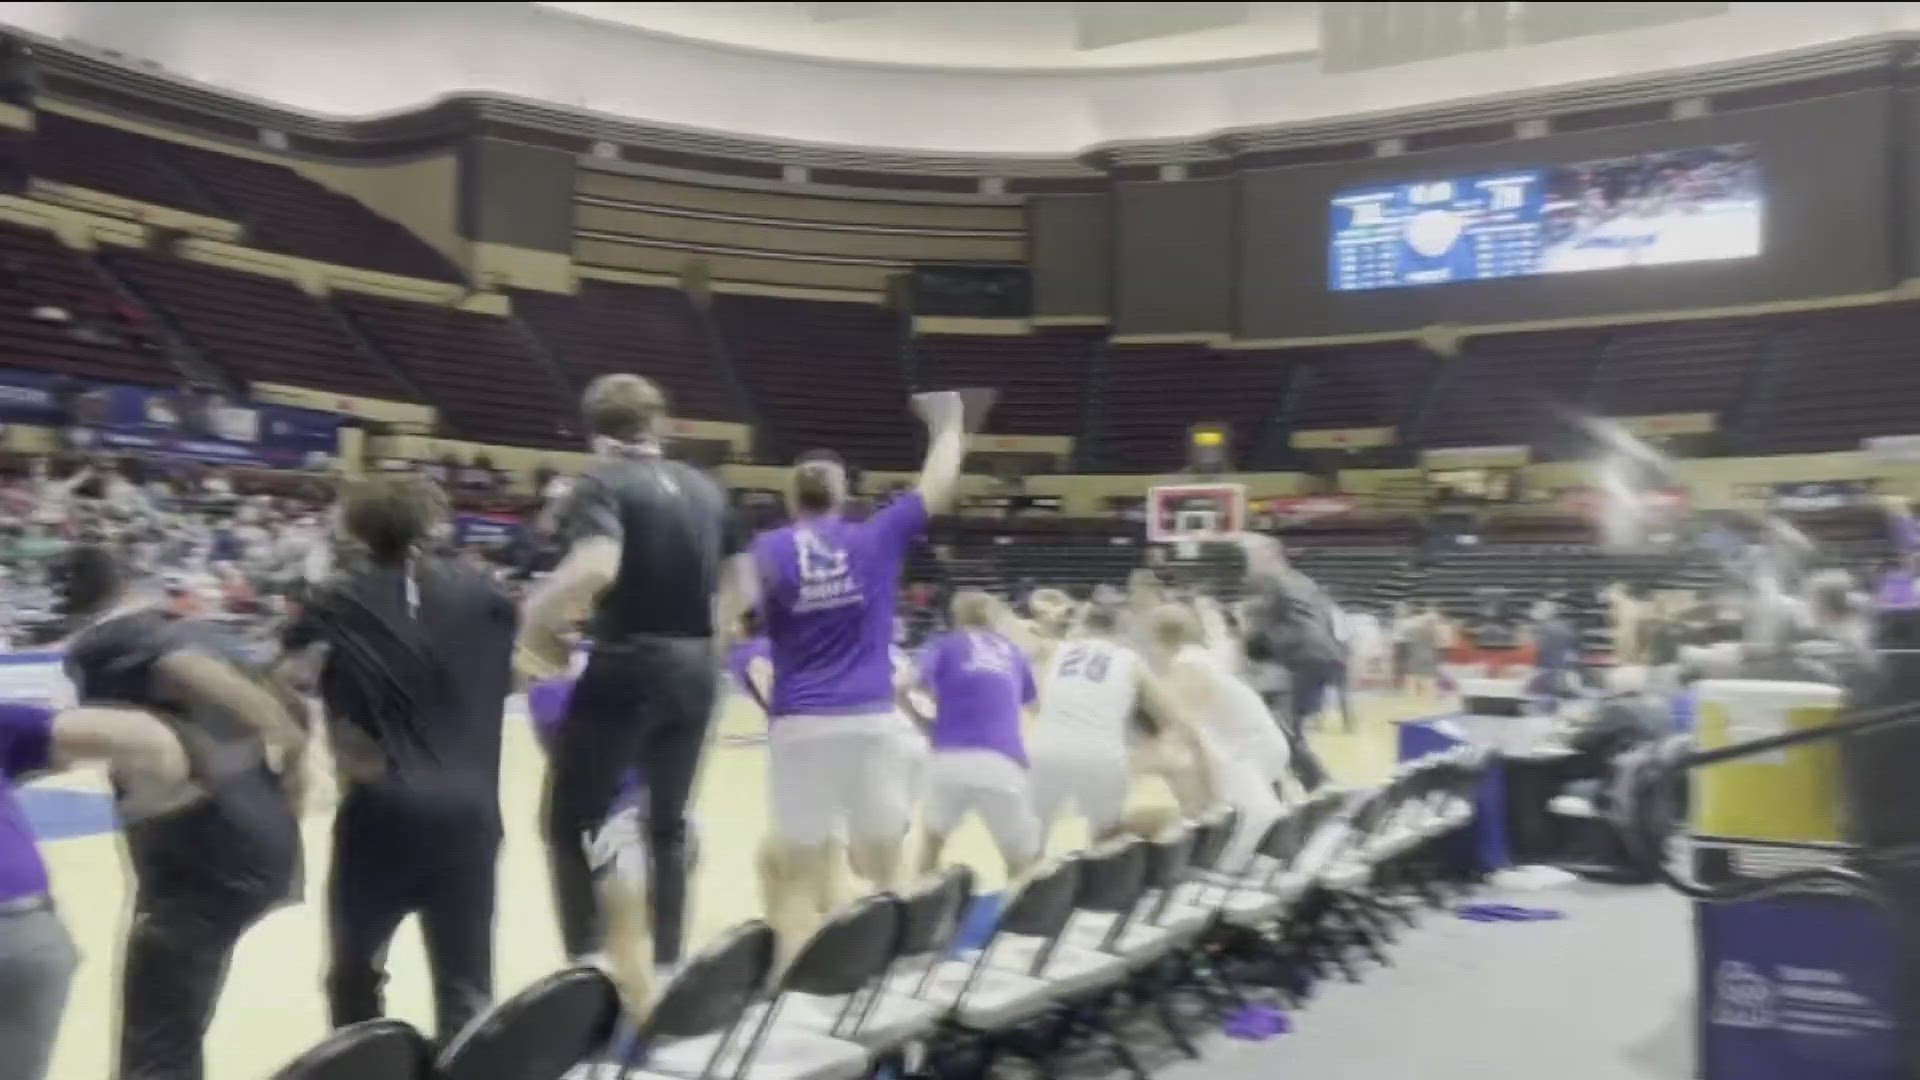 Since mid-January, the College of Idaho men's basketball team has been tabbed as the best in the land. The Yotes made it official Saturday night.